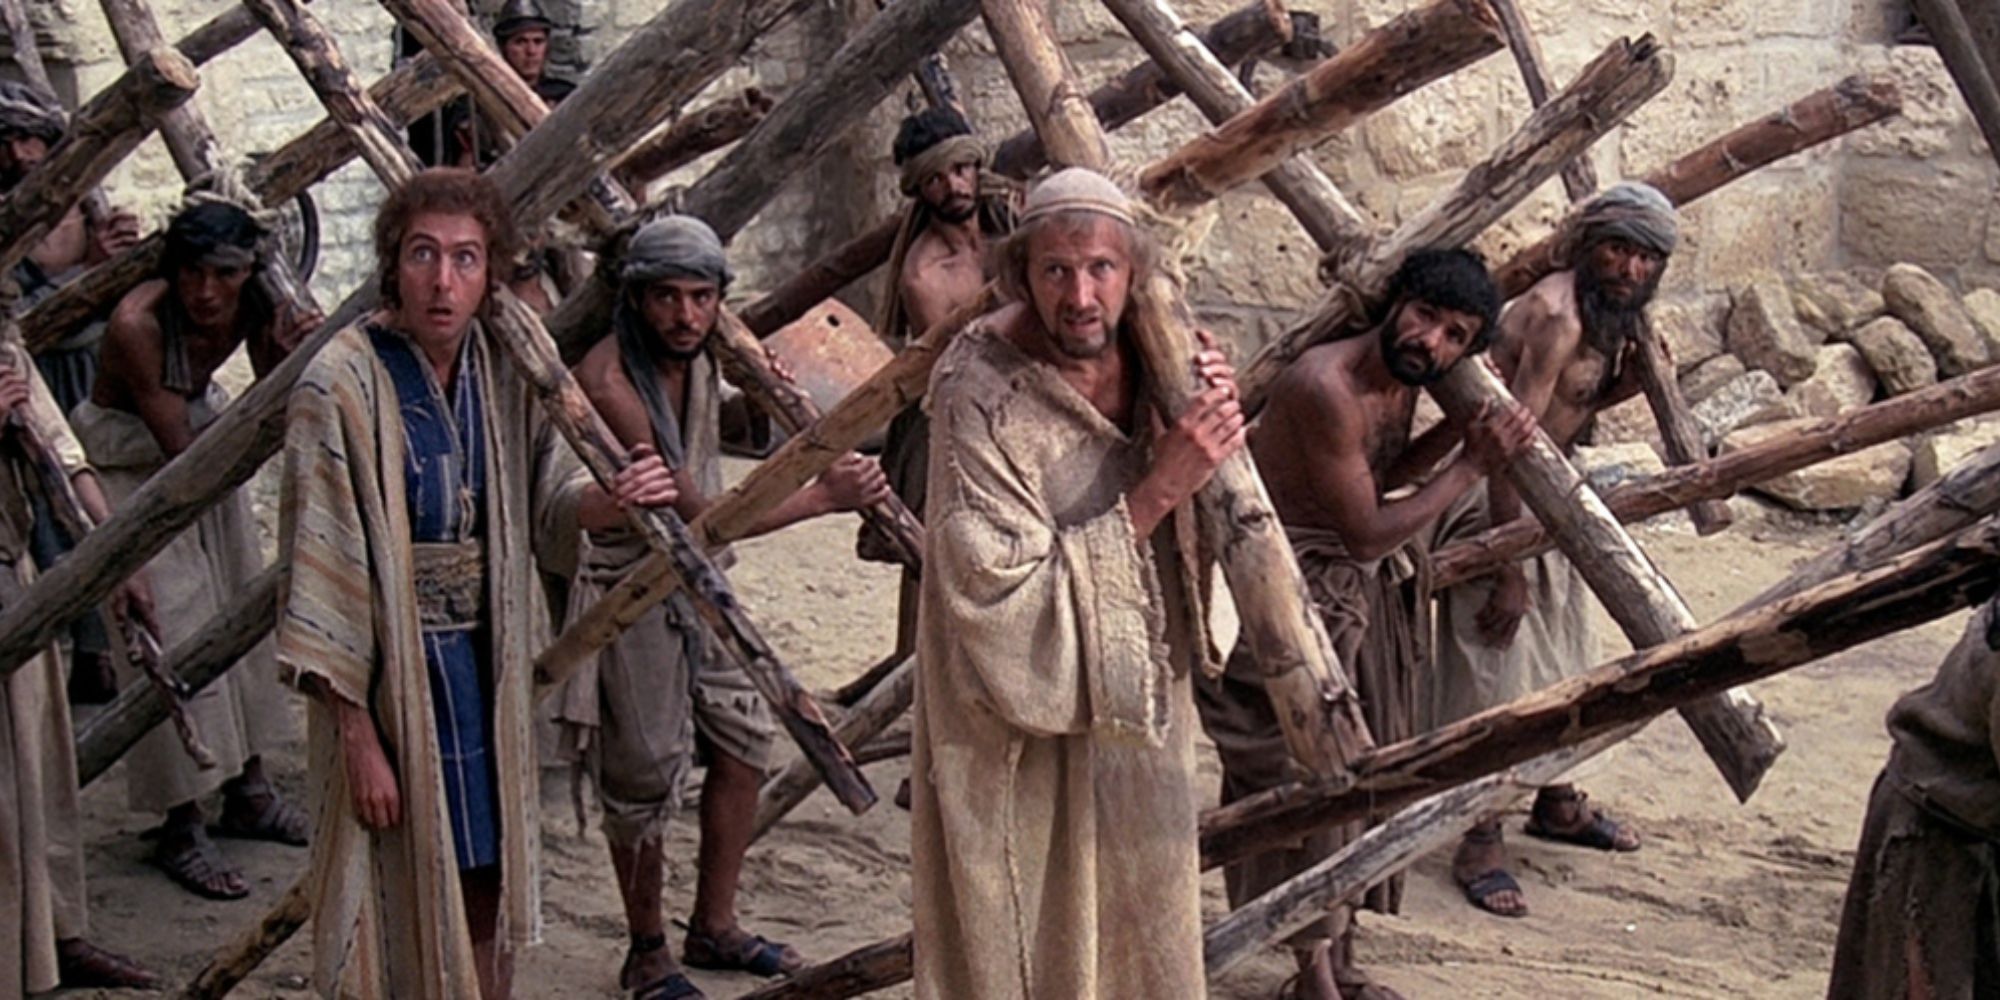 Brian and other crucifixion victims carry their crosses in Monty Pyton's Life of Brian 